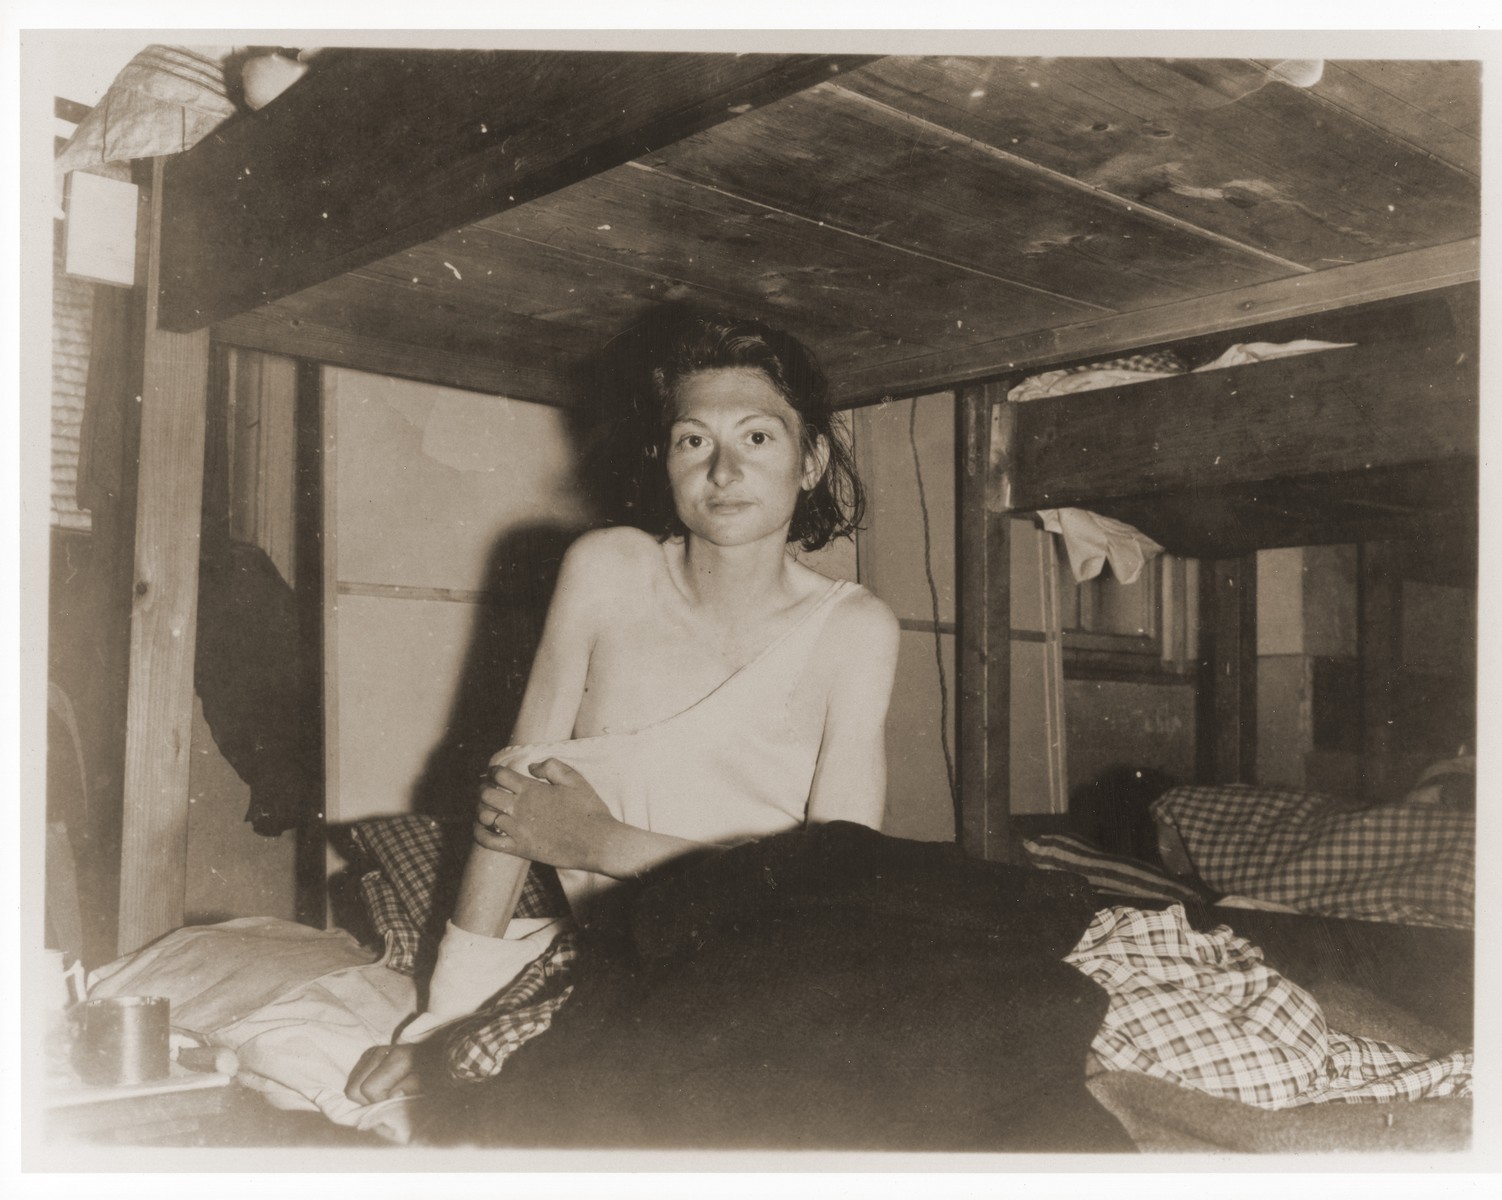 An emaciated female Jewish survivor of a death march sits up in bed at an American military field hospital in Volary, Czechoslovakia.

Pictured is twenty-two year old Amalie Mary Reichmann.
 
The original caption reads "Before and After Enslavement: Weakened by malnutrition after a forced march of 30 days during Nazi enslavement, this unidentified girl was found in Volary, Czechoslovakia, by units of the 5th Division, U.S. Third Army.  She was in a group of 150 persons, twenty of whom died daily  during the march."